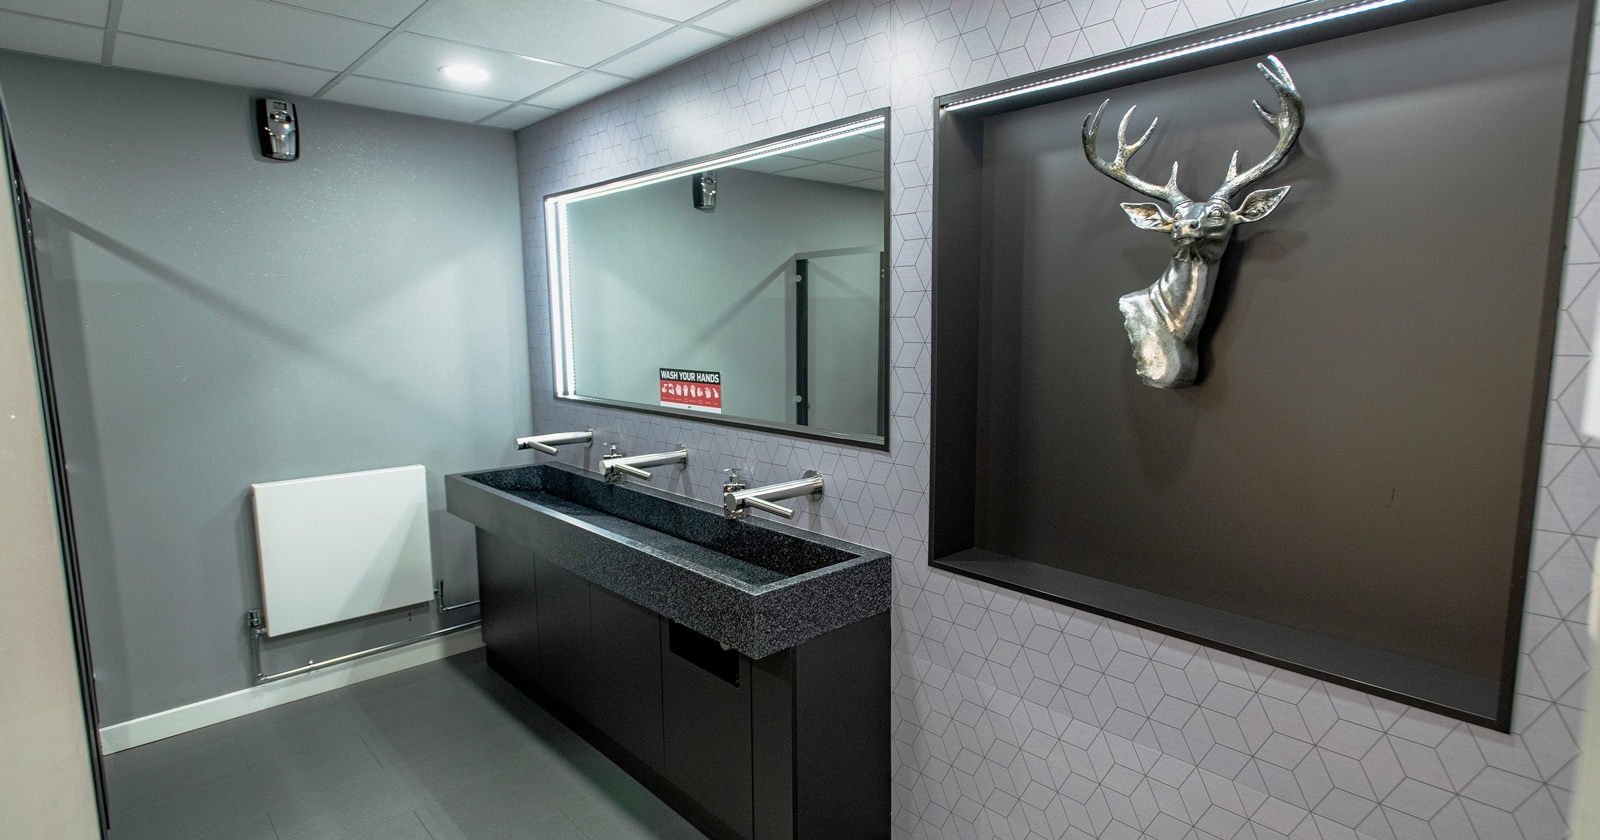 Slimming World Toilet Refurbishment by APSS Joinery with Bespoke Toilet Cubicles and Vanity Units Stag